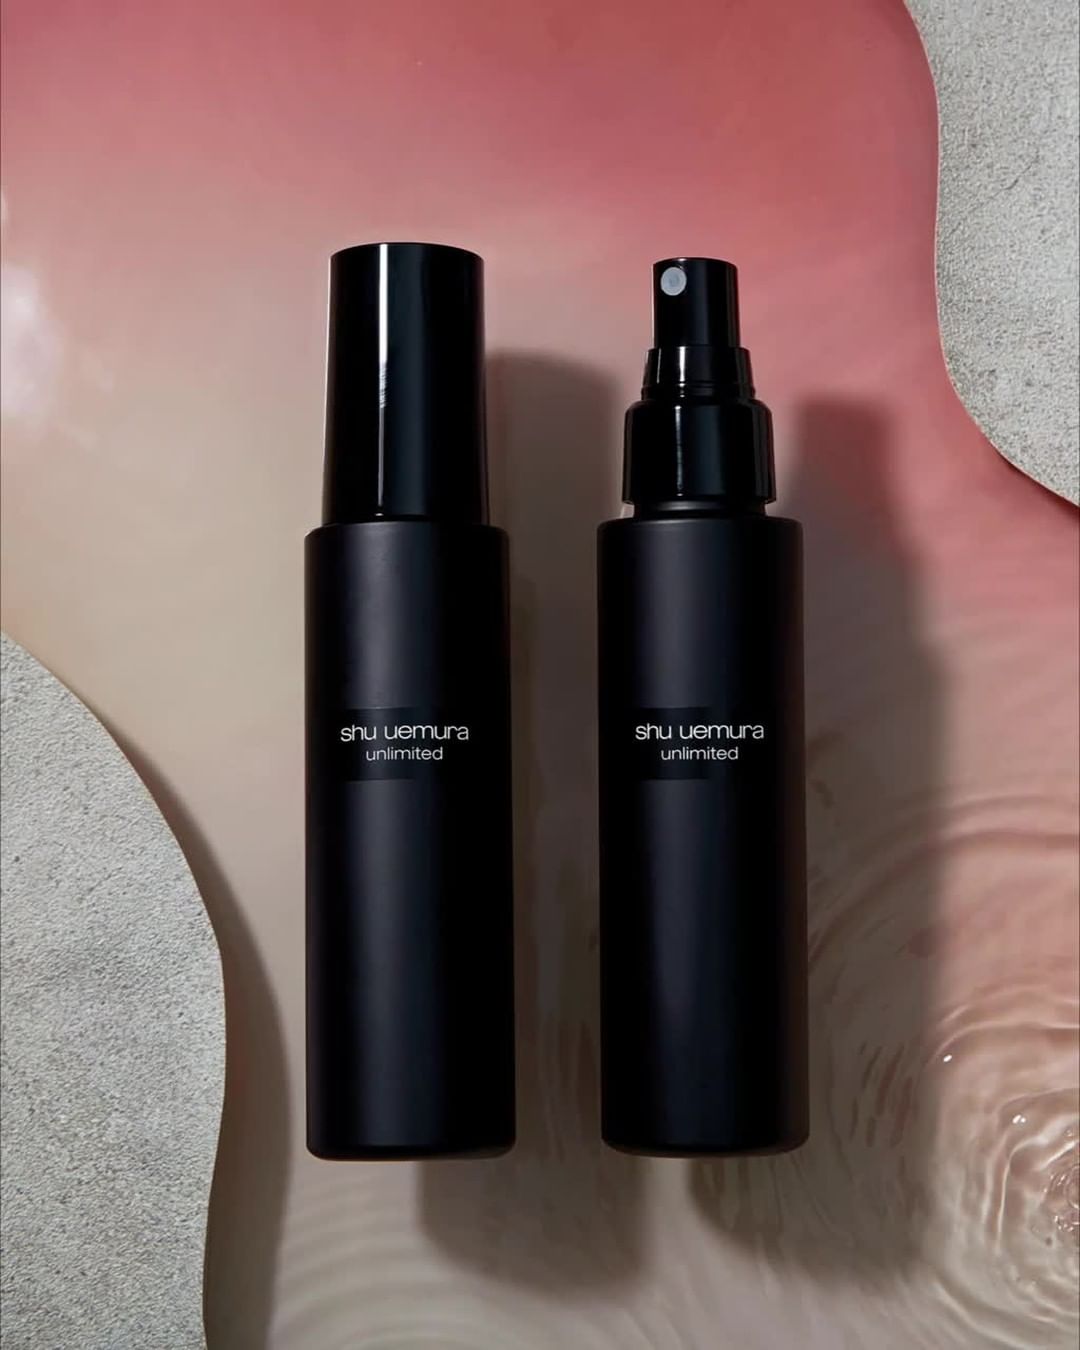 shu uemura - the last step of your morning routine to ensure your makeup stays fresh all day long. ☔ #shuuemura #unlimitedfoundation⁠